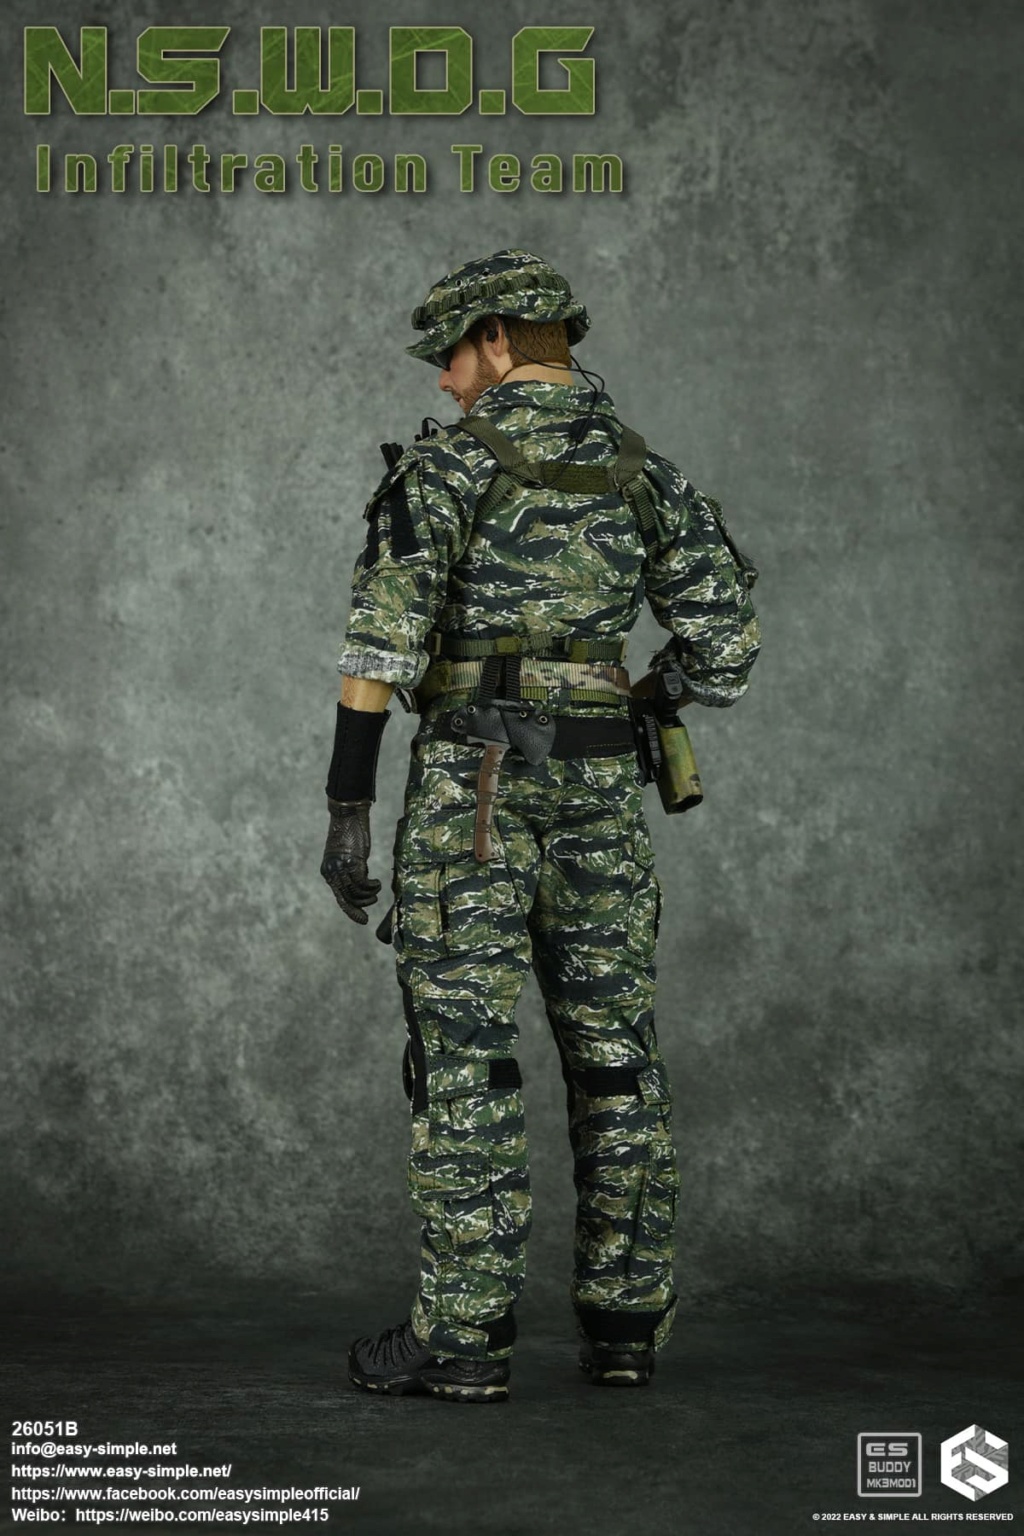 NSWDG - NEW PRODUCT: EASY AND SIMPLE 1/6 SCALE FIGURE: N.S.W.D.G INFILTRATION TEAM - (2 Versions) 7603